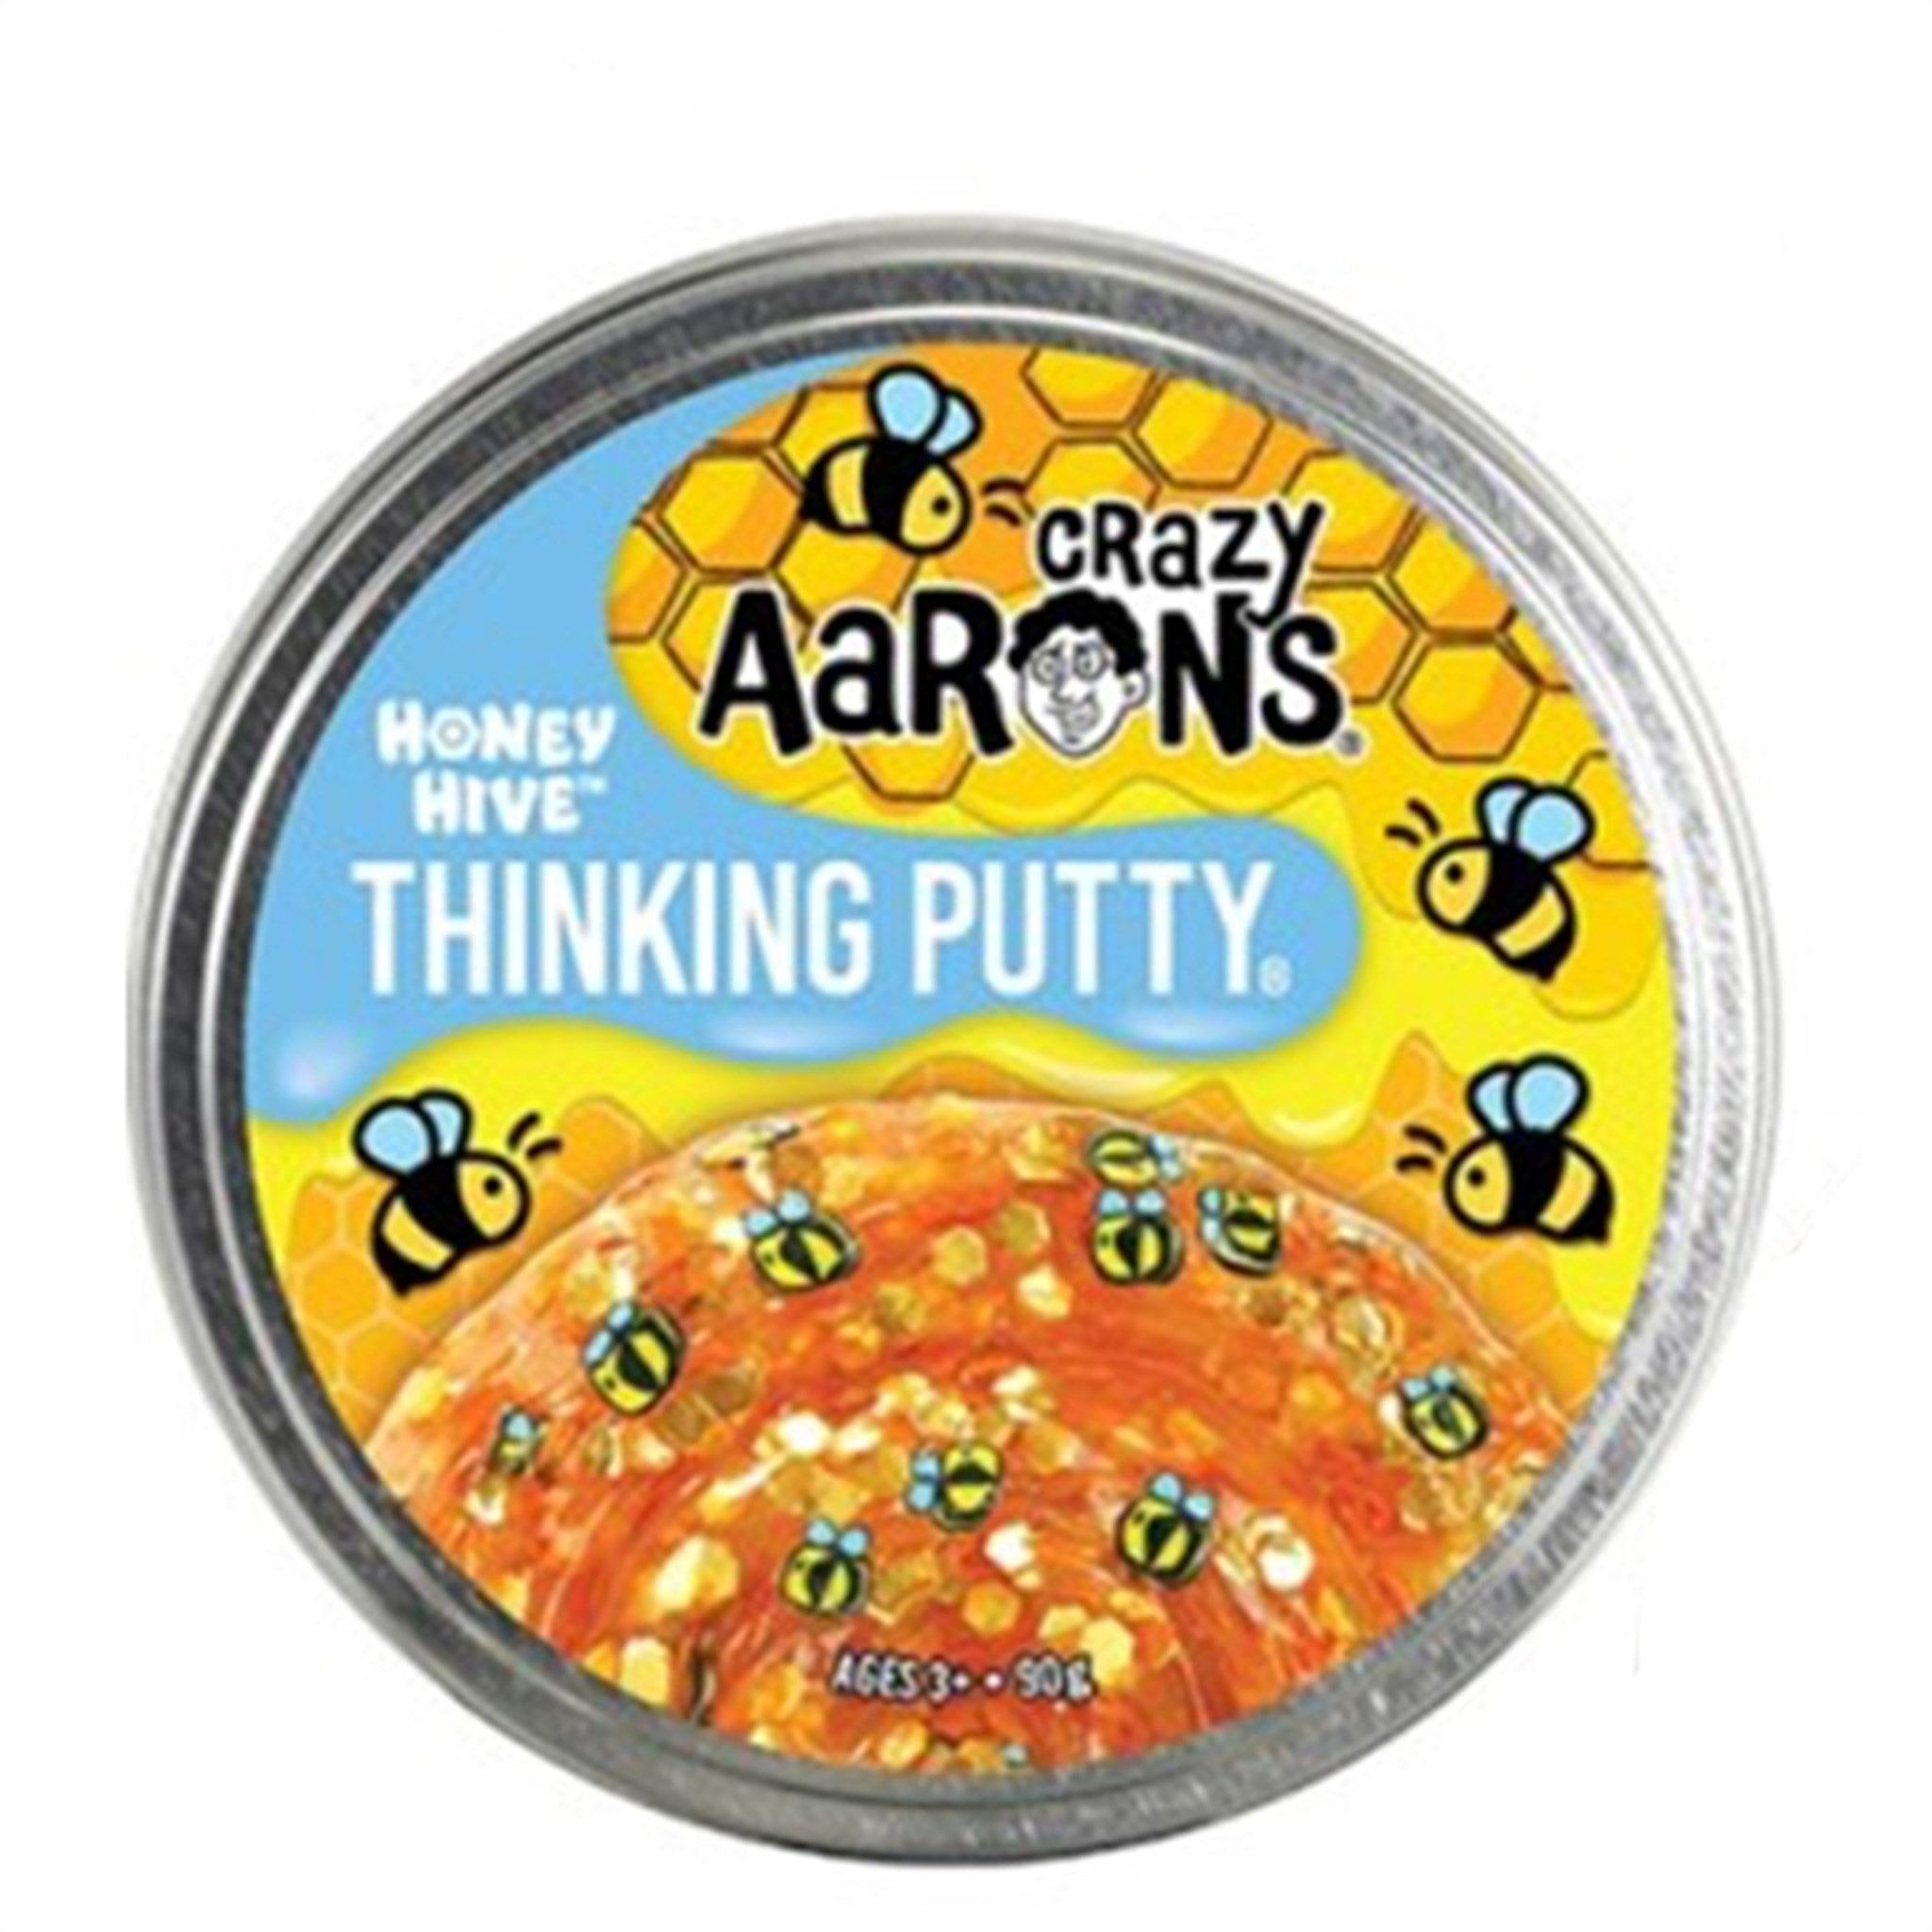 Crazy Aaron's® Slim - Thinking Putty Trendsetters - Honey Hive